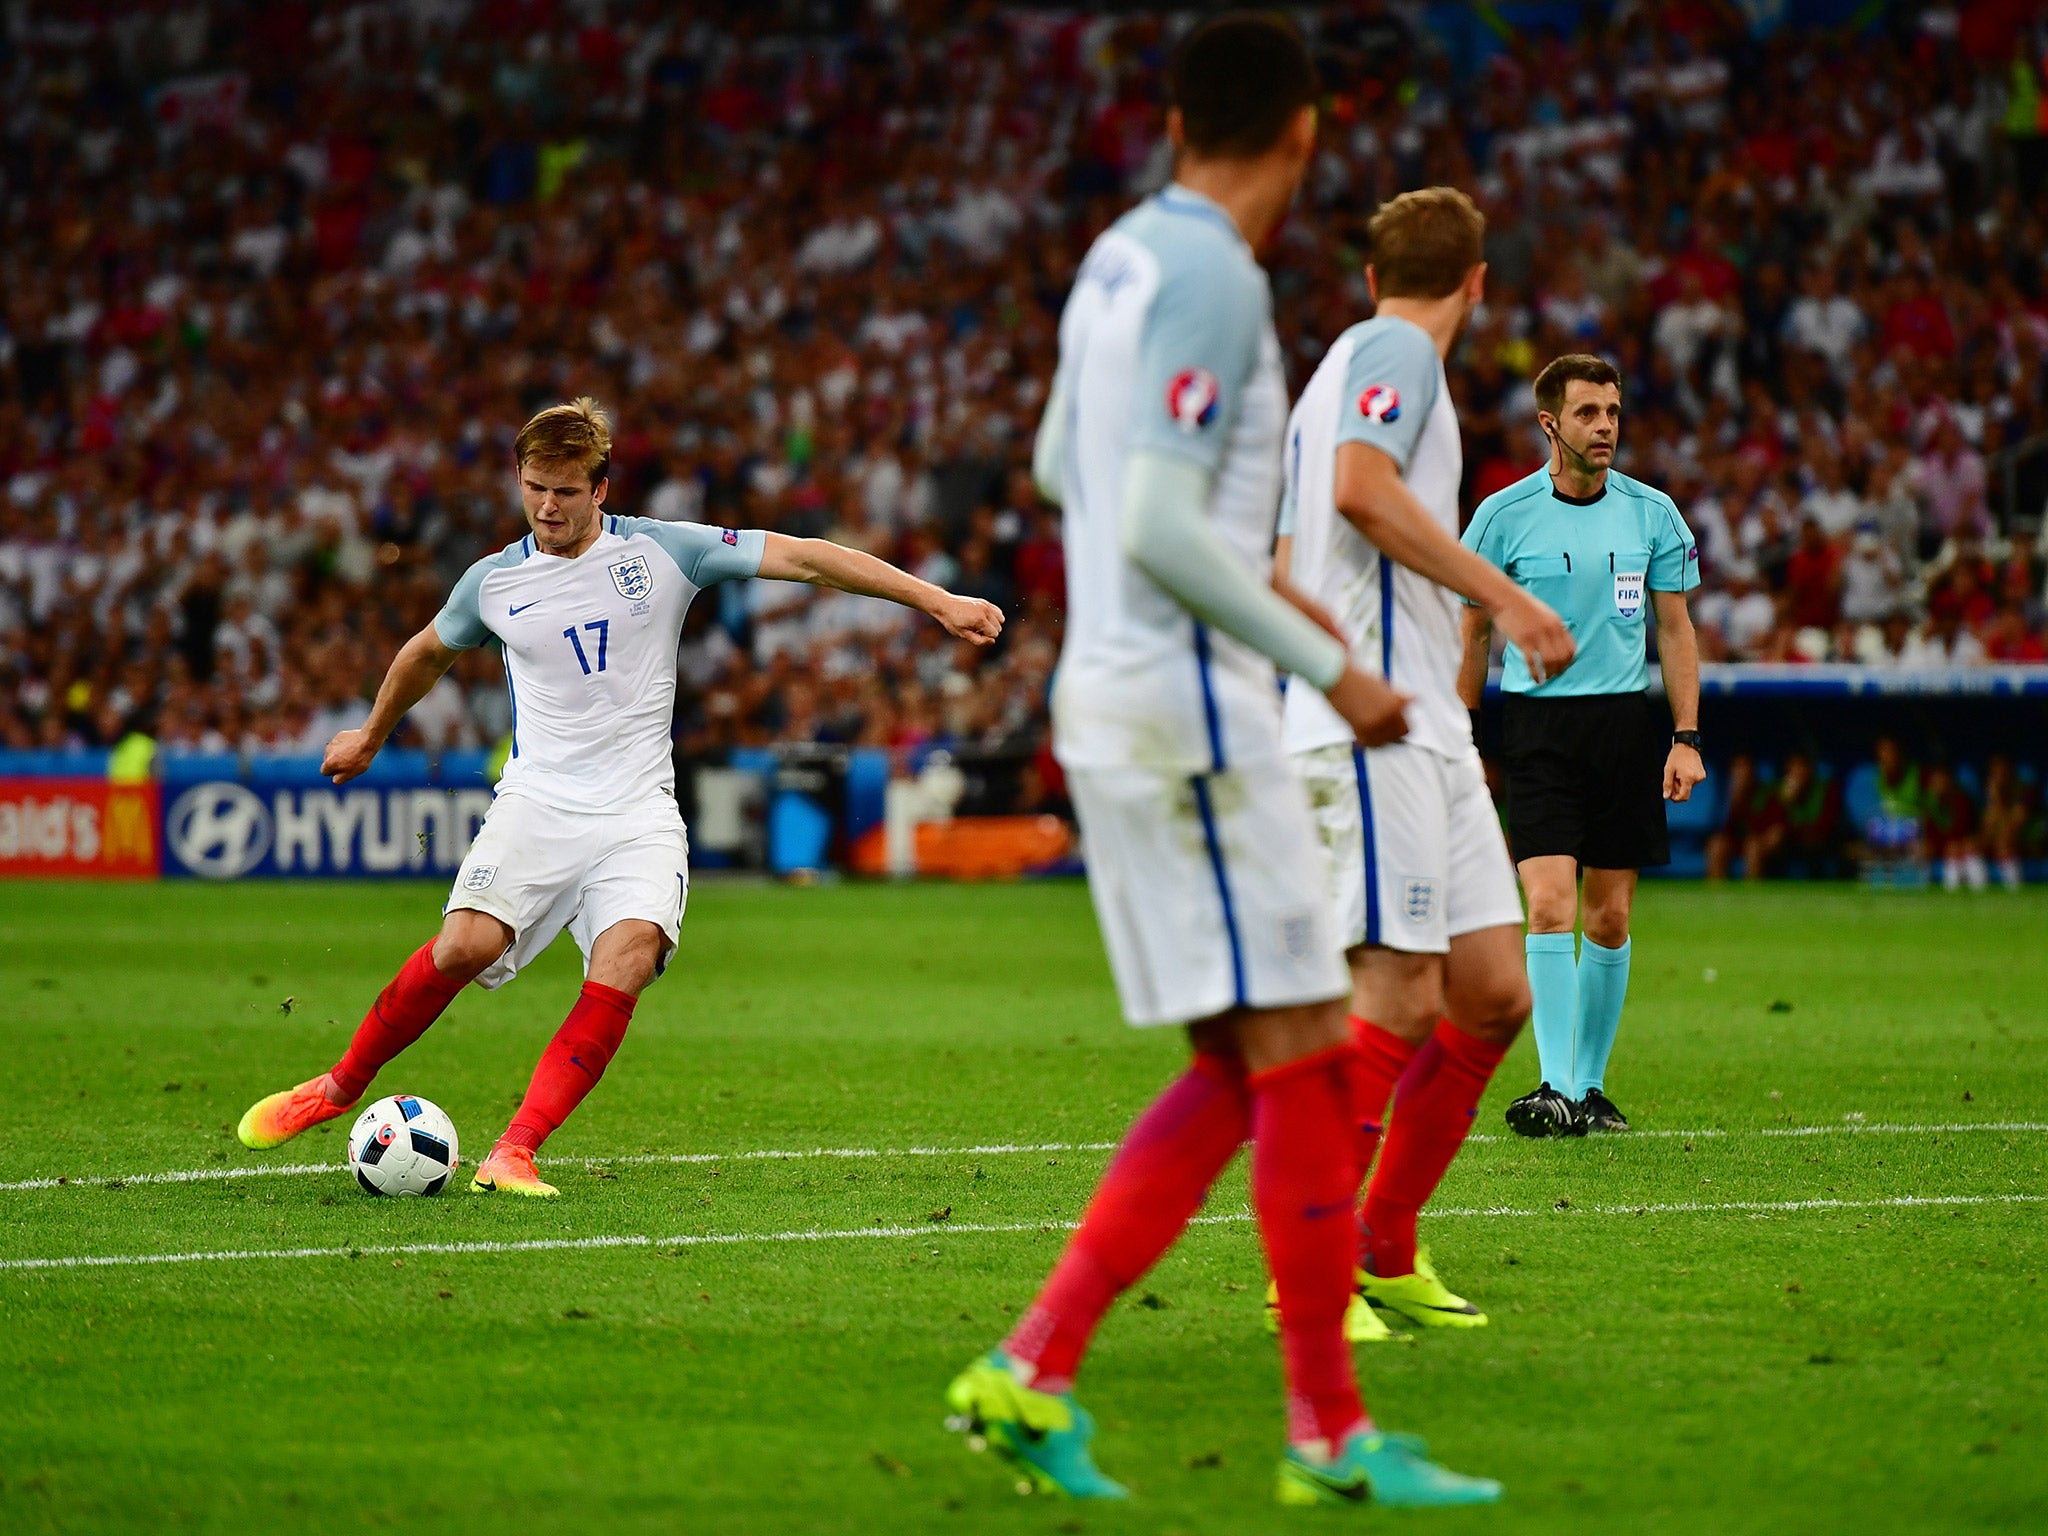 Eric Dier strikes a free-kick to give England the lead against Russia